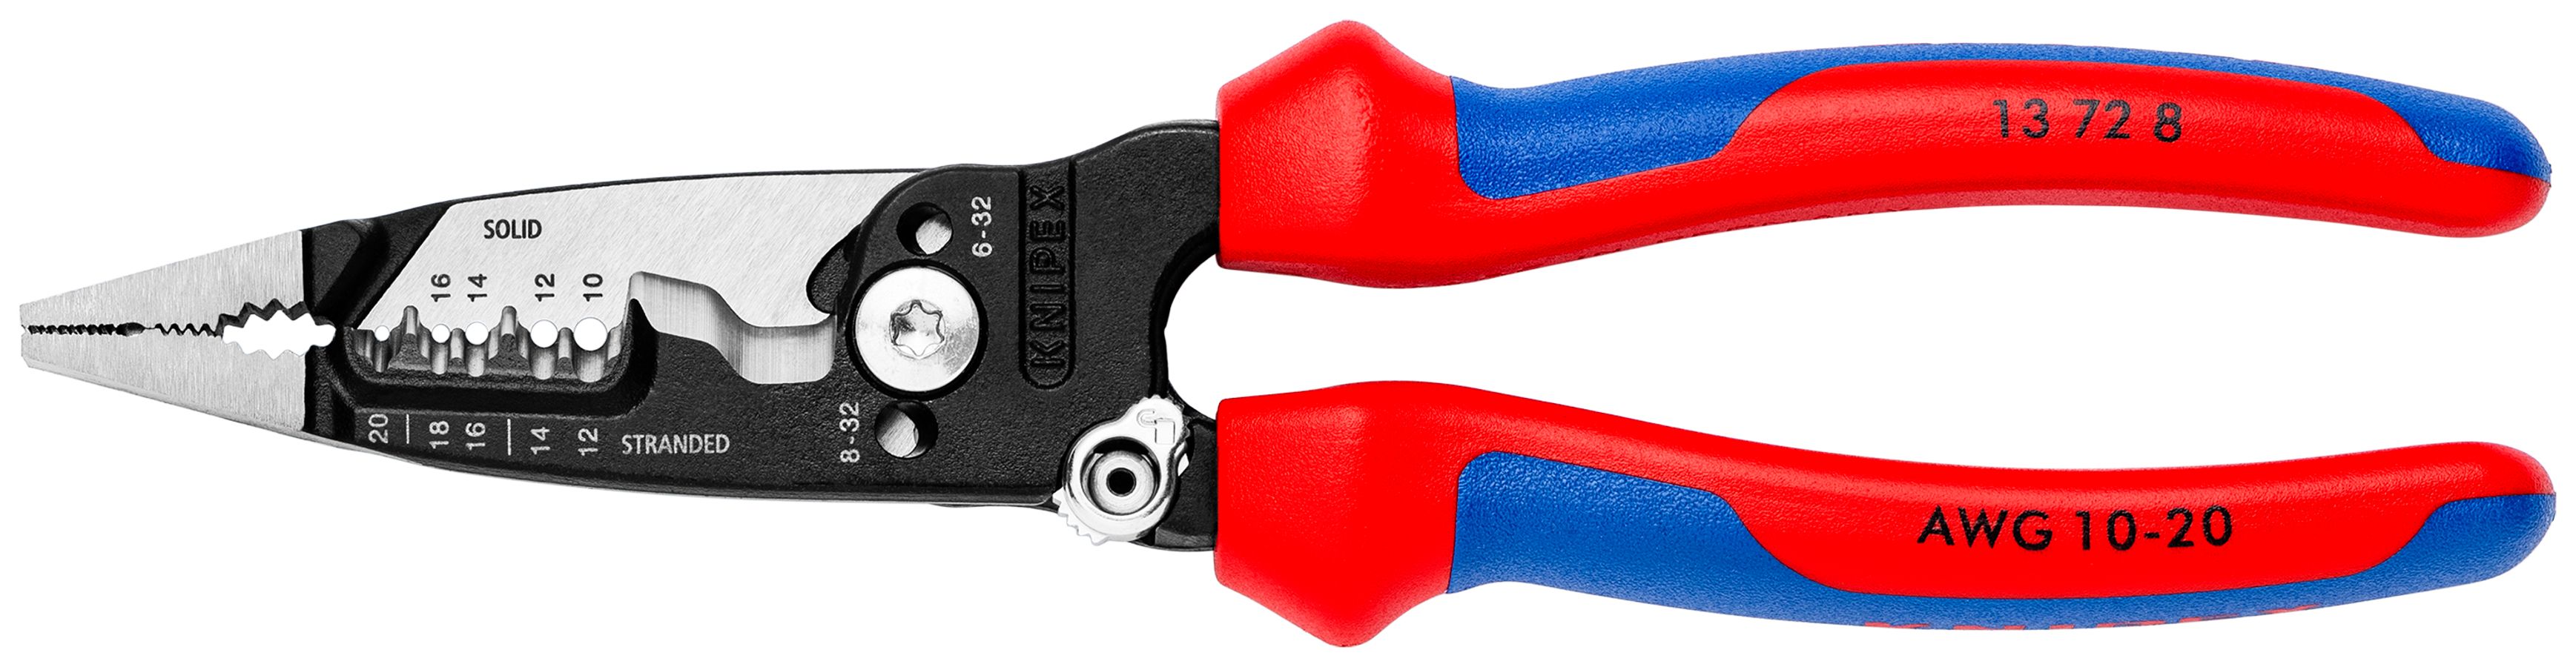 Forged Wire Stripper 20-10 AWG | KNIPEX Tools